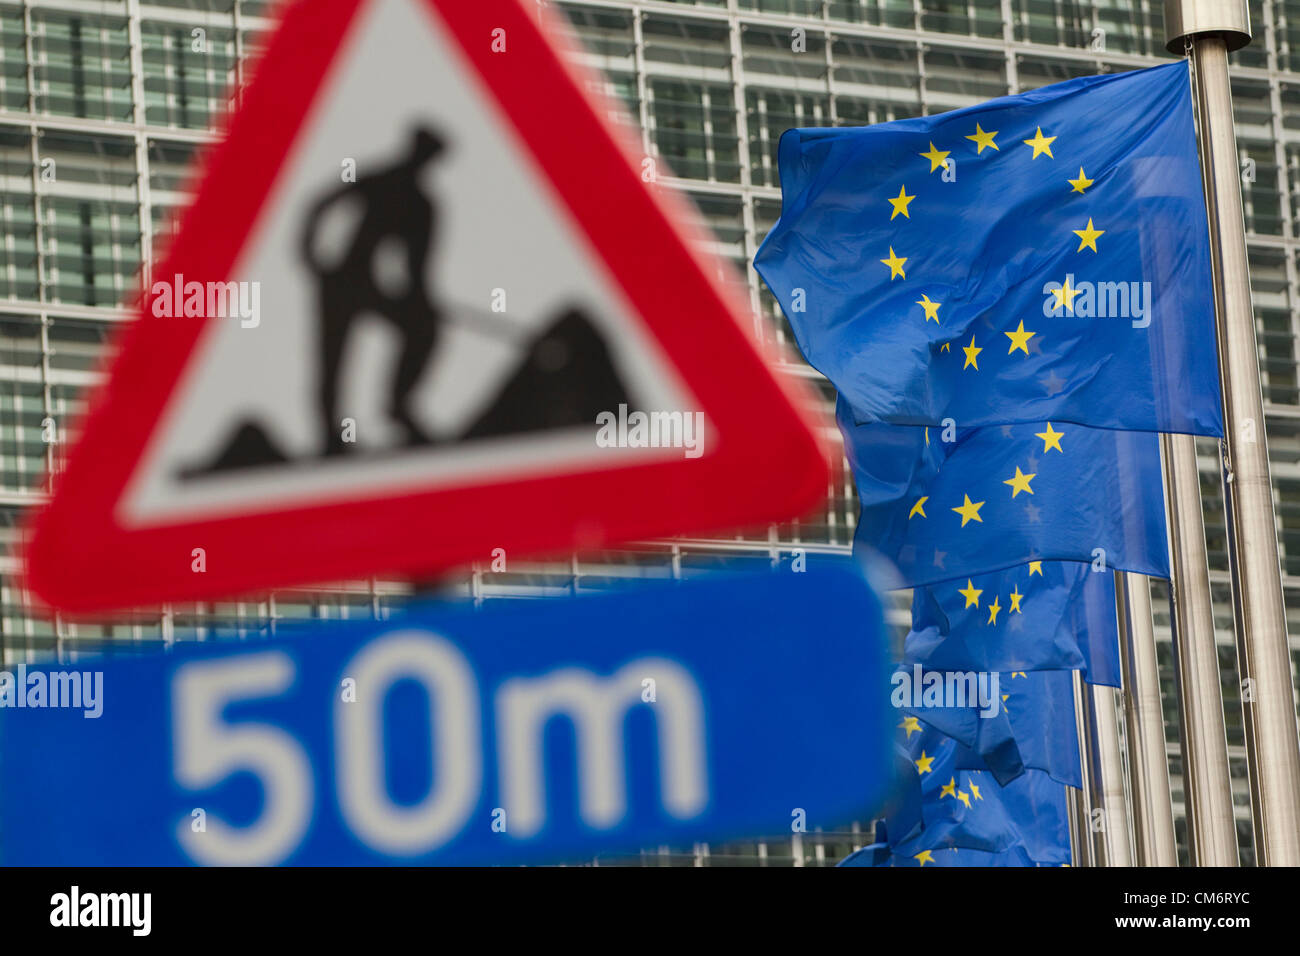 Brussels, Belgium. 18th October, 2012. European Council meeting (Brussels 18-19 October 2012). Picture shows European Union flags behind a roadworks sign outside the Charlemagne Building, Brussels, ahead of the European Council meeting where European leaders will meet to discuss the mounting debt crisis across Europe. Stock Photo